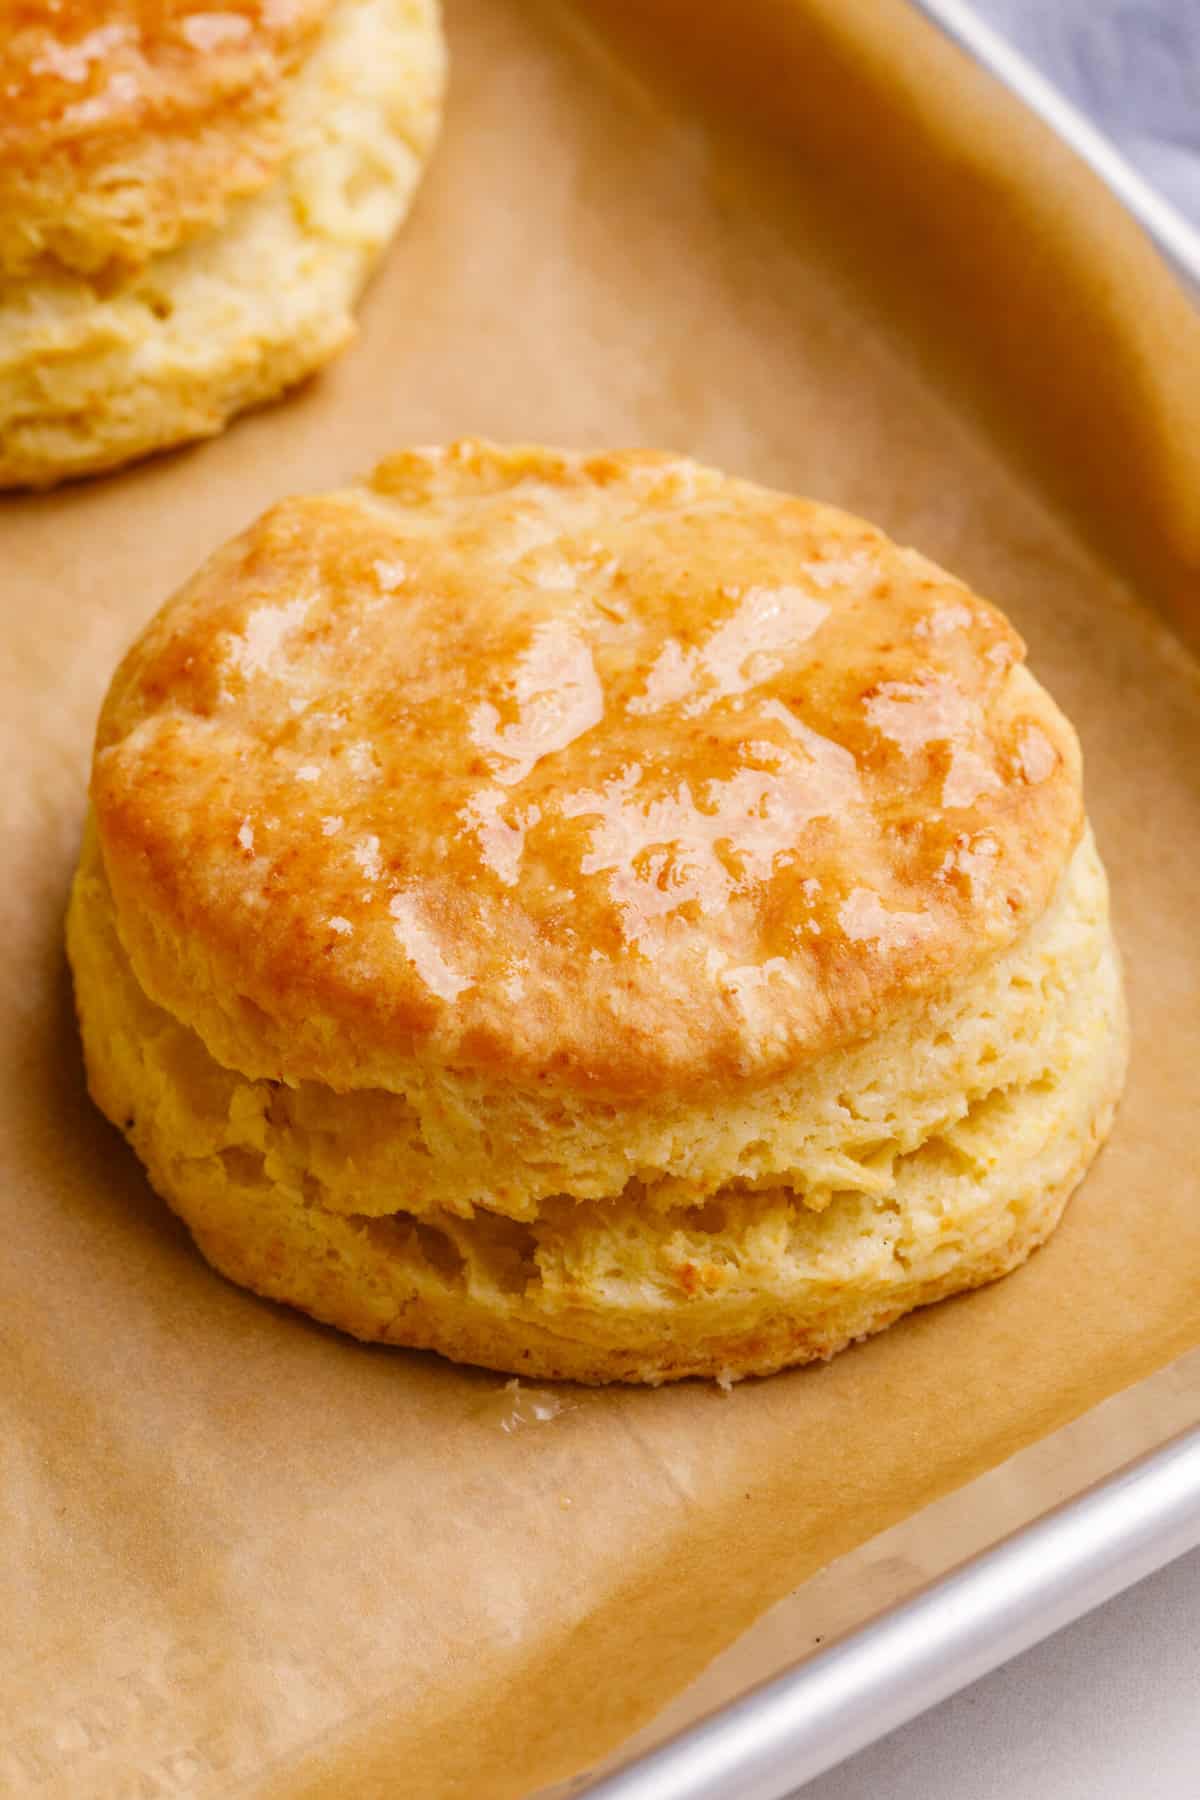 close up image of a homemade popeyes biscuit.